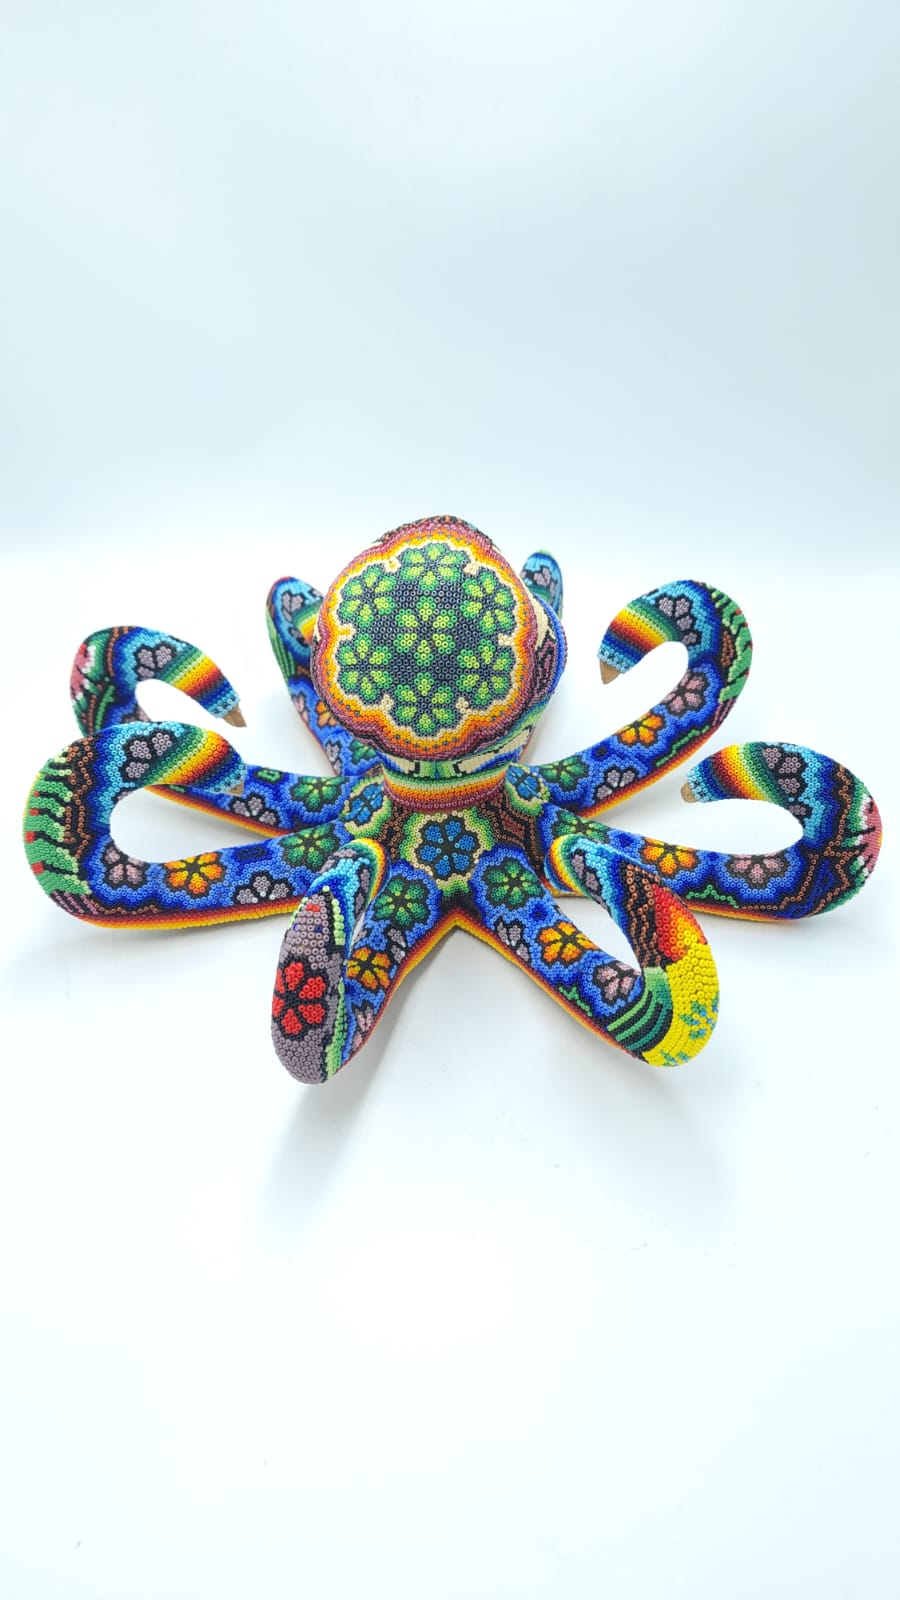 Hand Beaded Huichol Indian Mexican Folk Art Octopus By Morelia Lopez PP6146